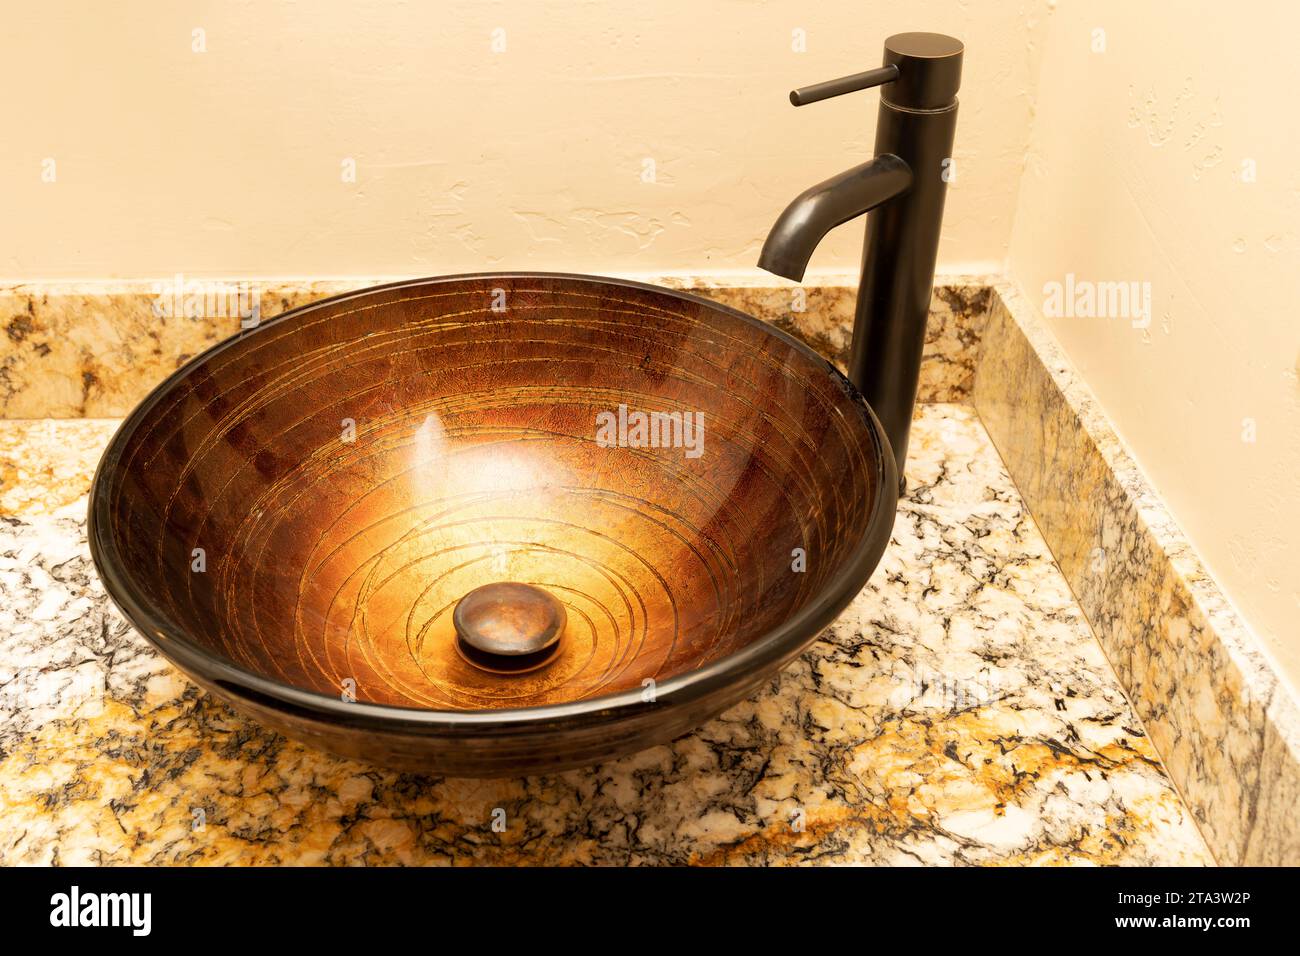 Golden Greek Glass Bowl Vessel Bathroom Sink And Faucet Set In Antique Rubbed Bronze Finish On Granite Countertop, Beige Walls. Close Up Bath Fixture Stock Photo